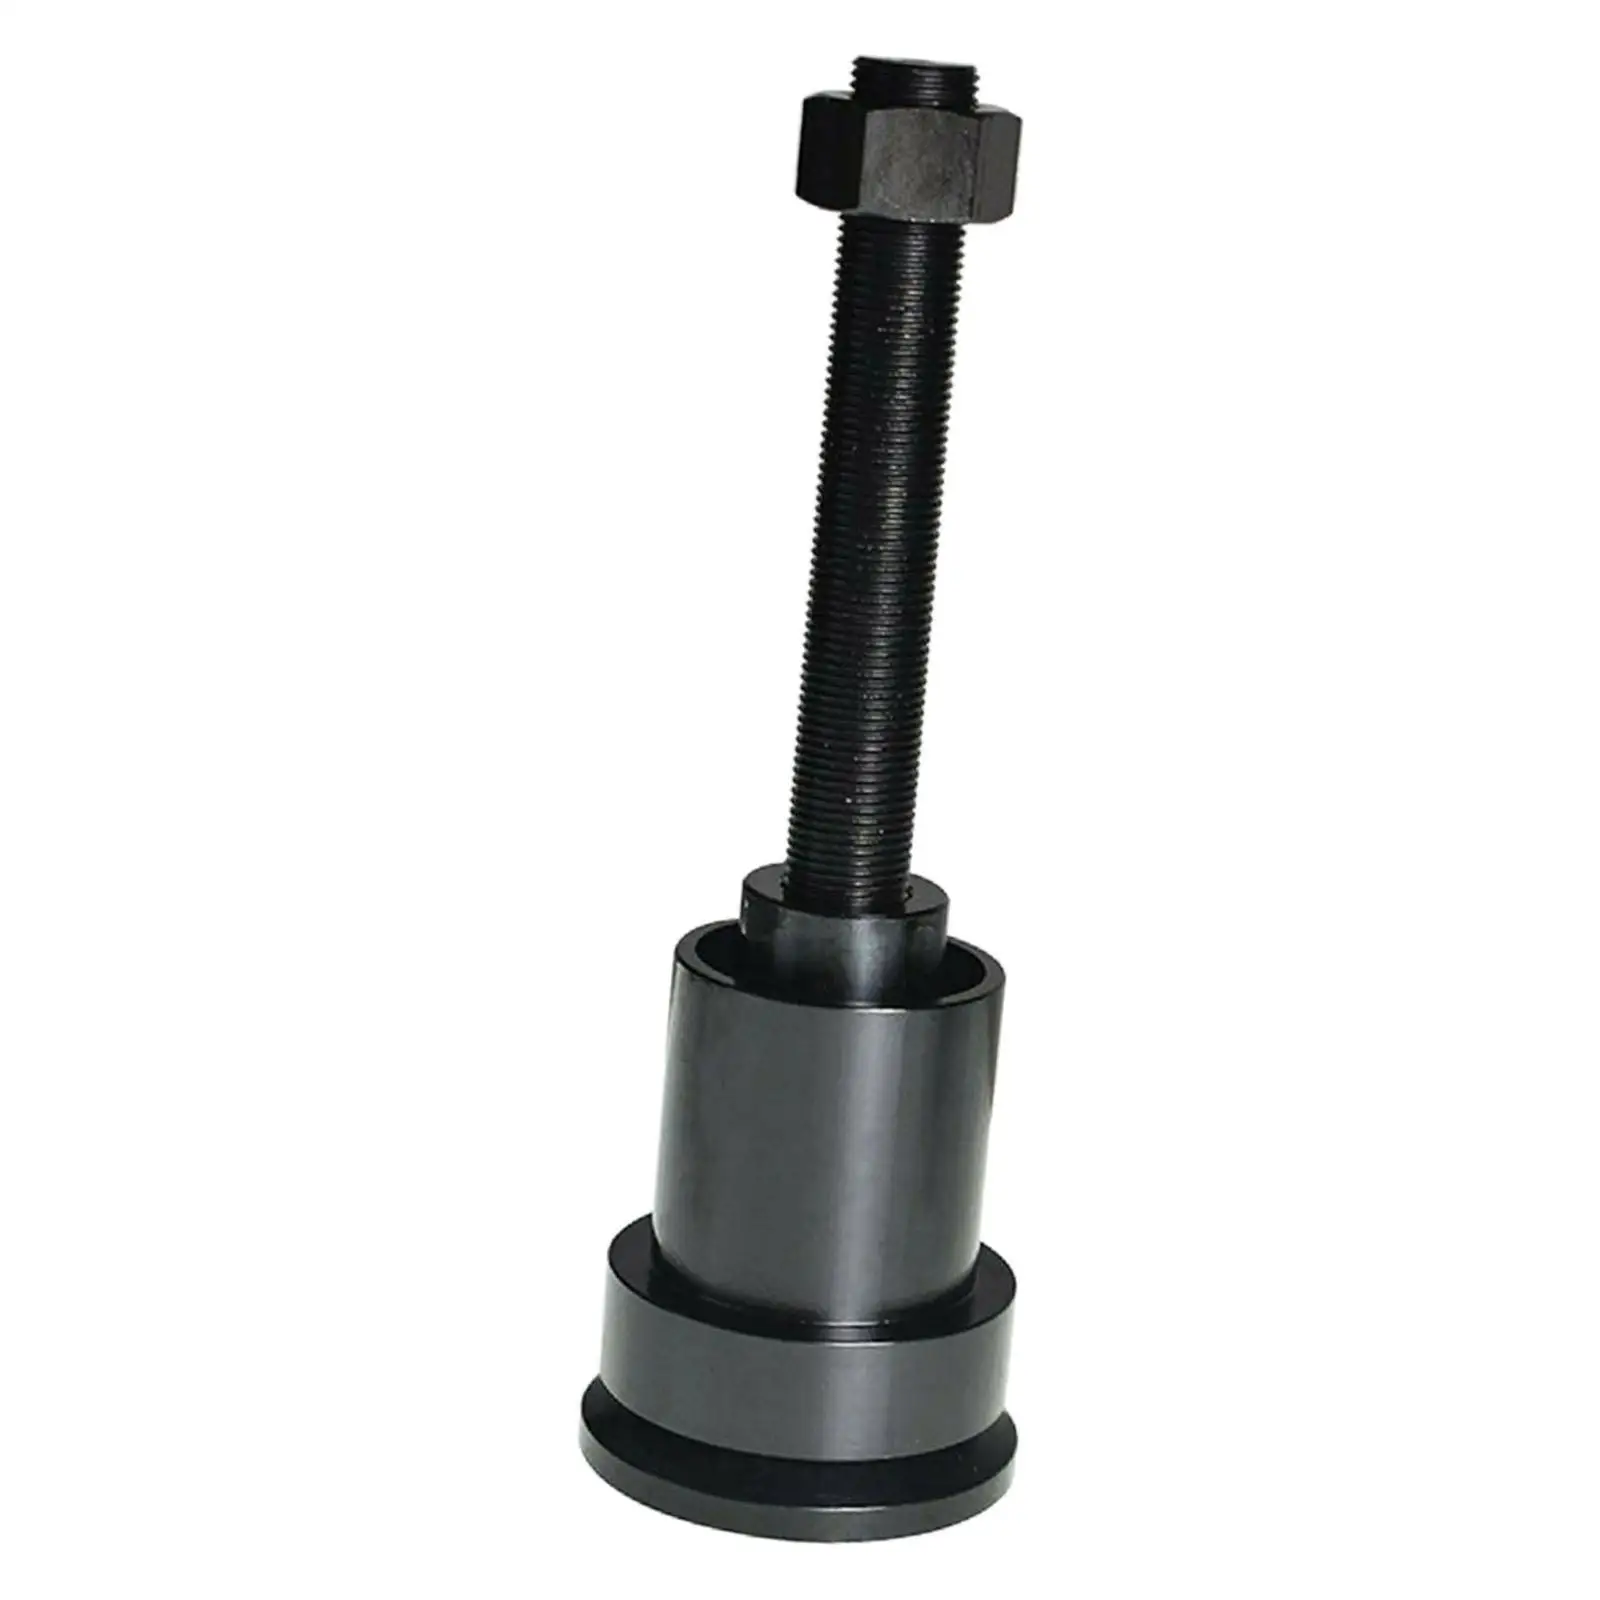 Inner Axle Side Seal Installation Tool for 30 44 60 Differentials Removal Tool Fit for Wrangler Replacement Parts ACC